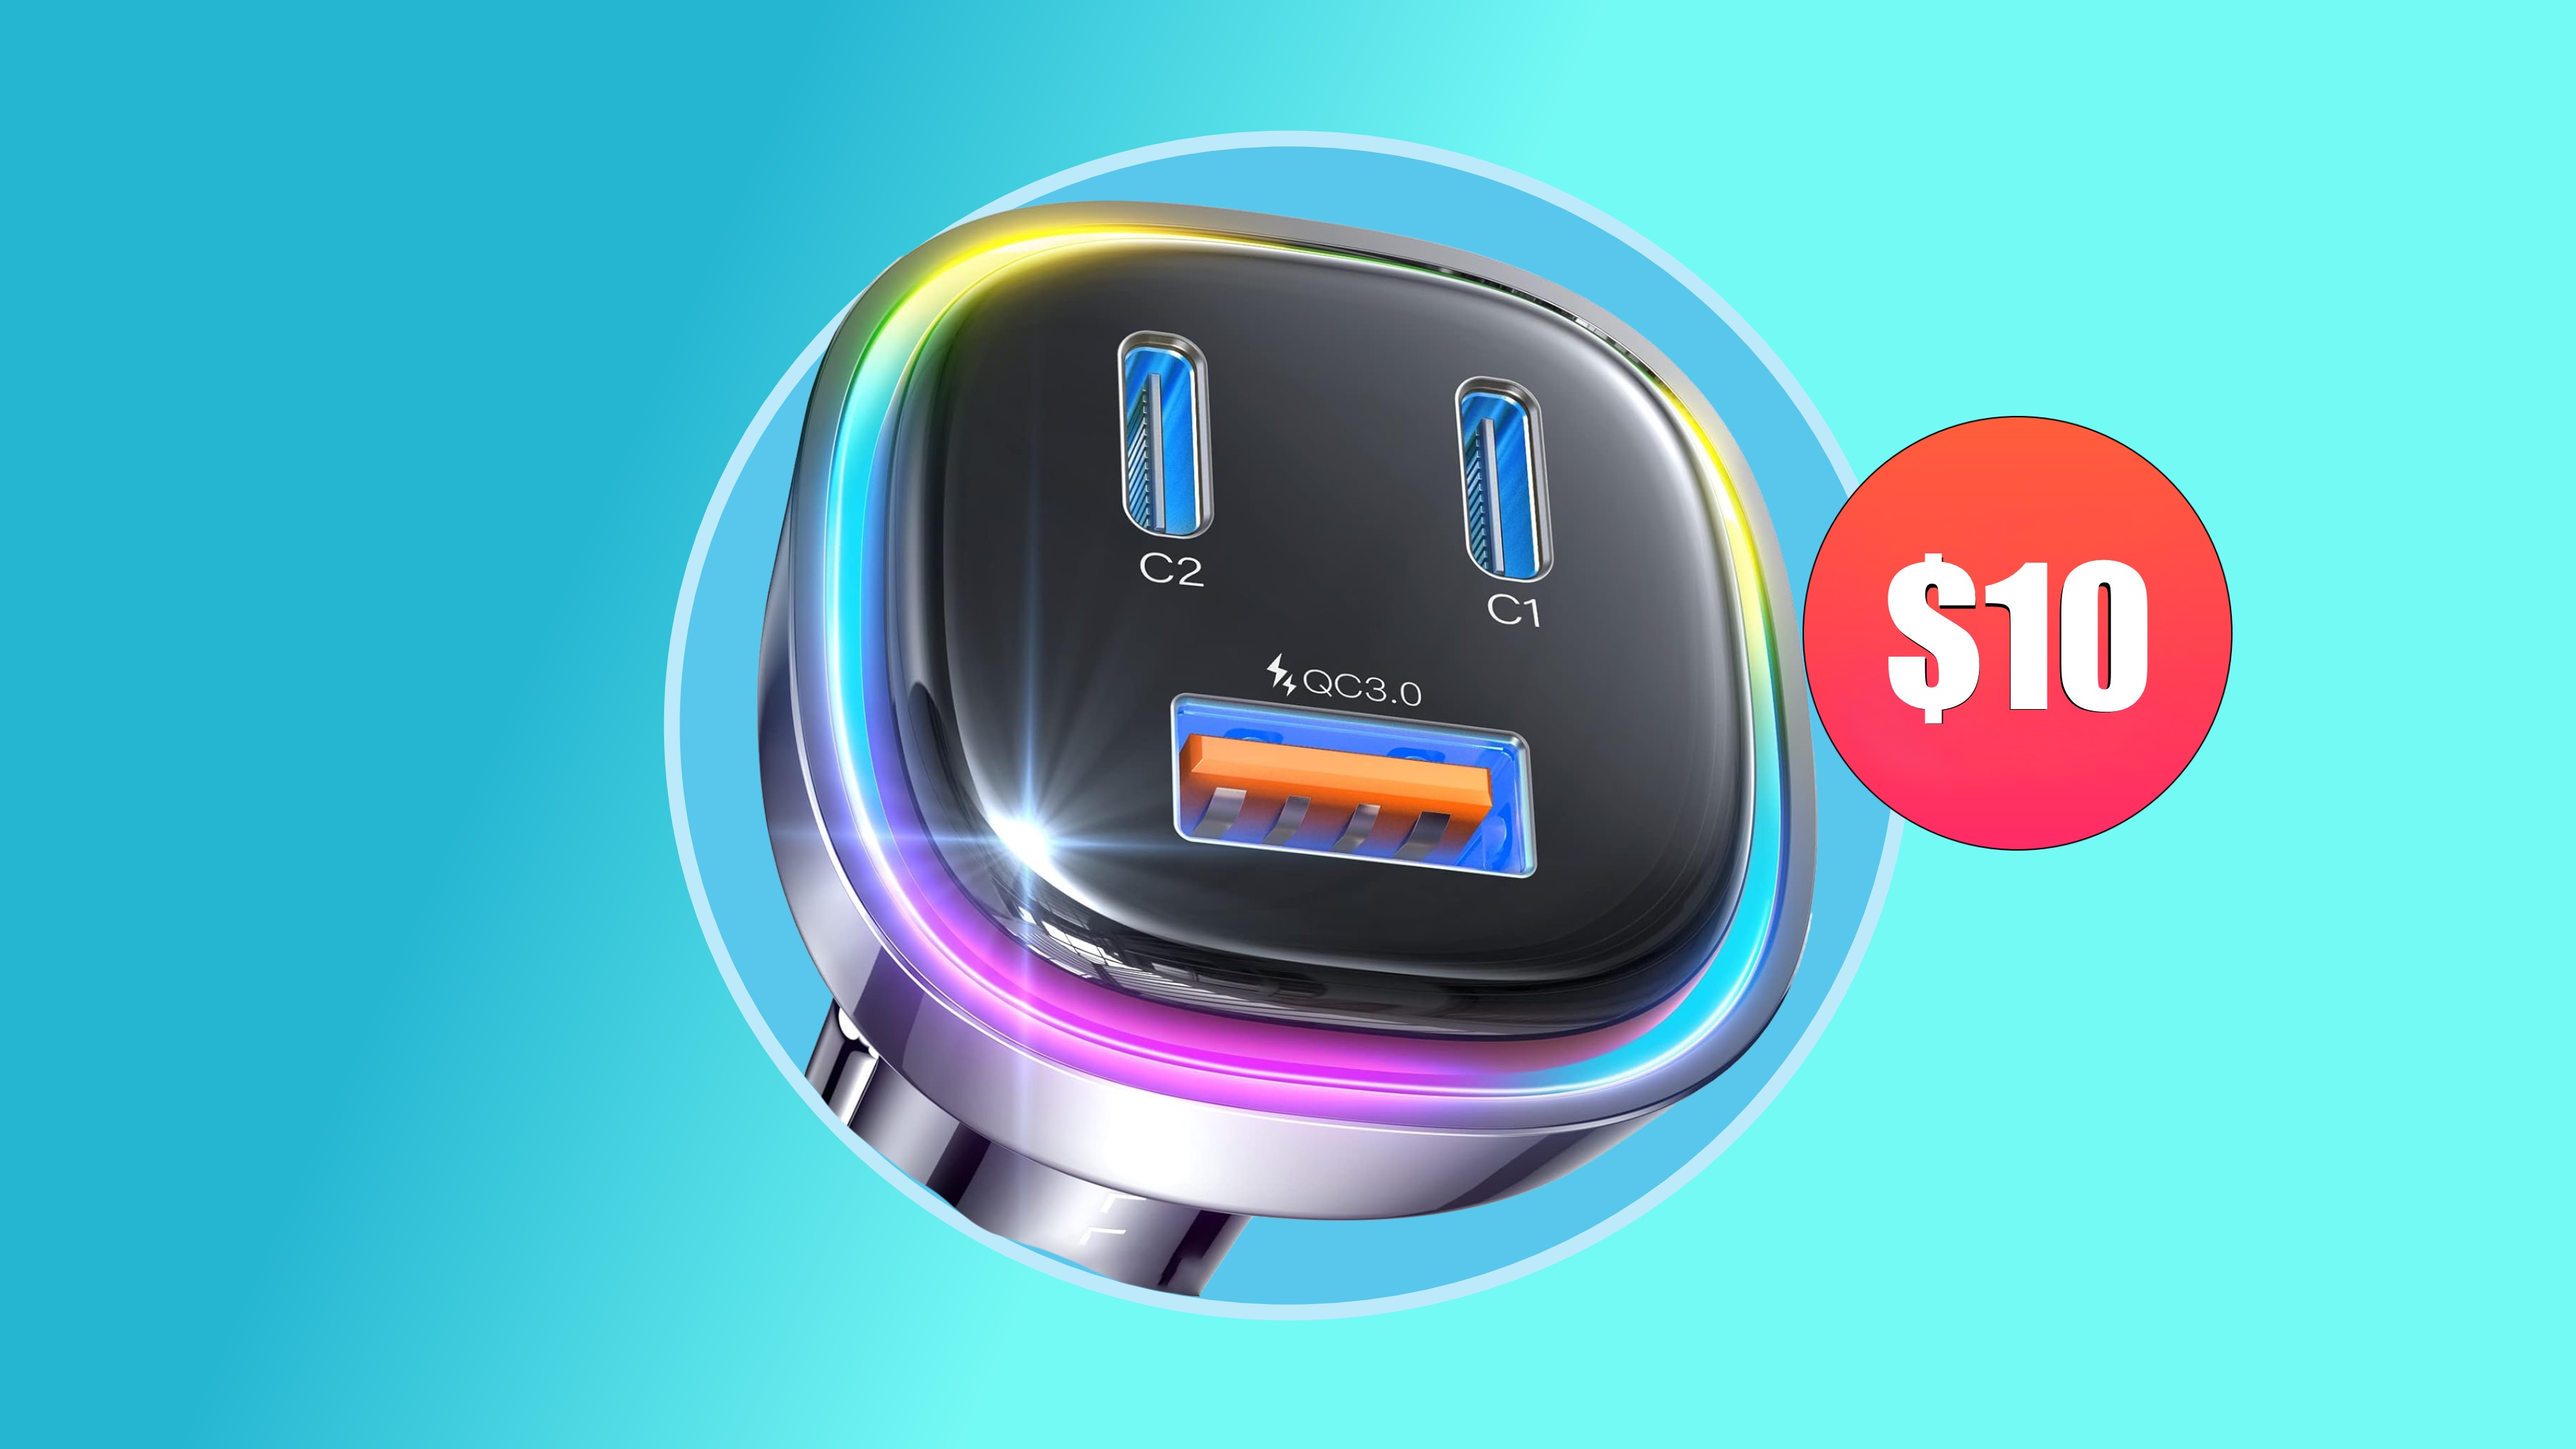 Get this powerful, 3-in-1, robot-faced car charger for just $10